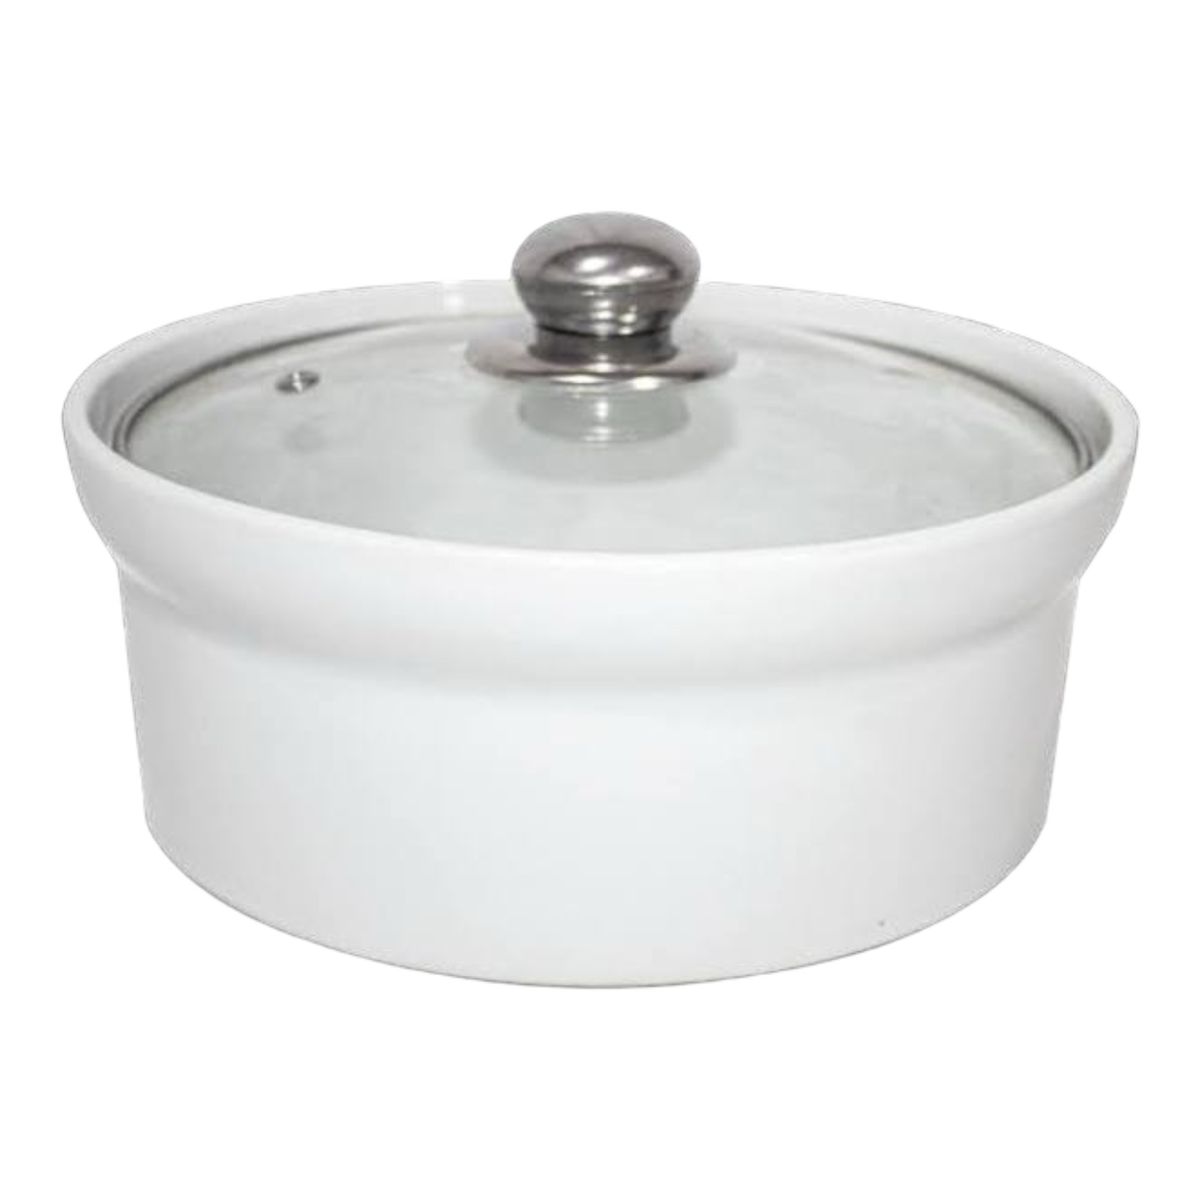 Casserole 22x9cm Porcelain with Glass Lid | Shop Today. Get it Tomorrow ...